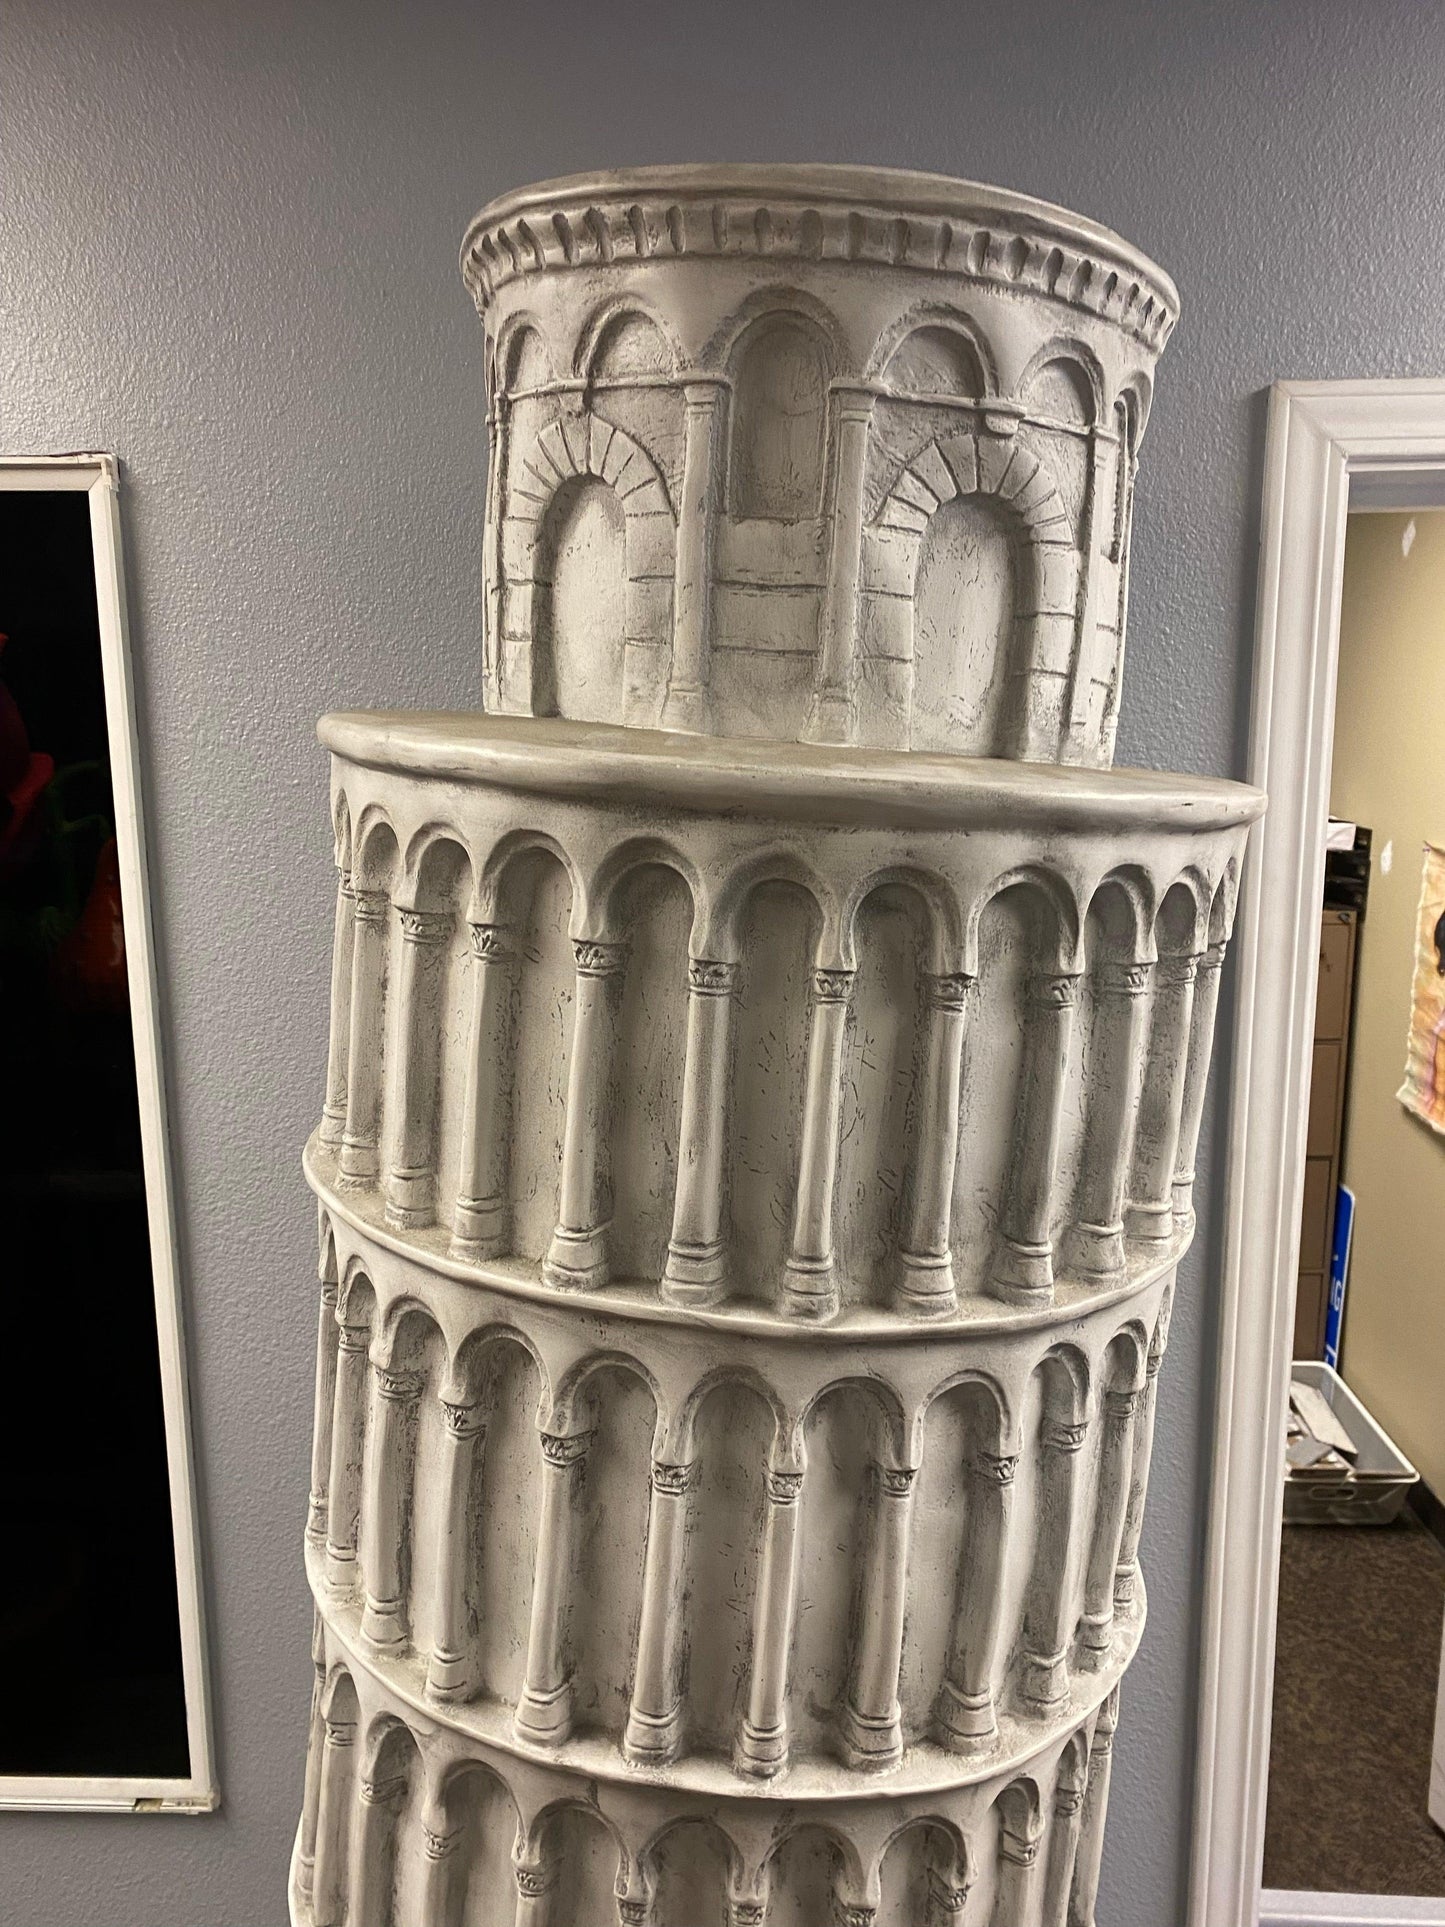 Leaning Tower Of Pisa Life Size Statue - LM Treasures Prop Rentals 